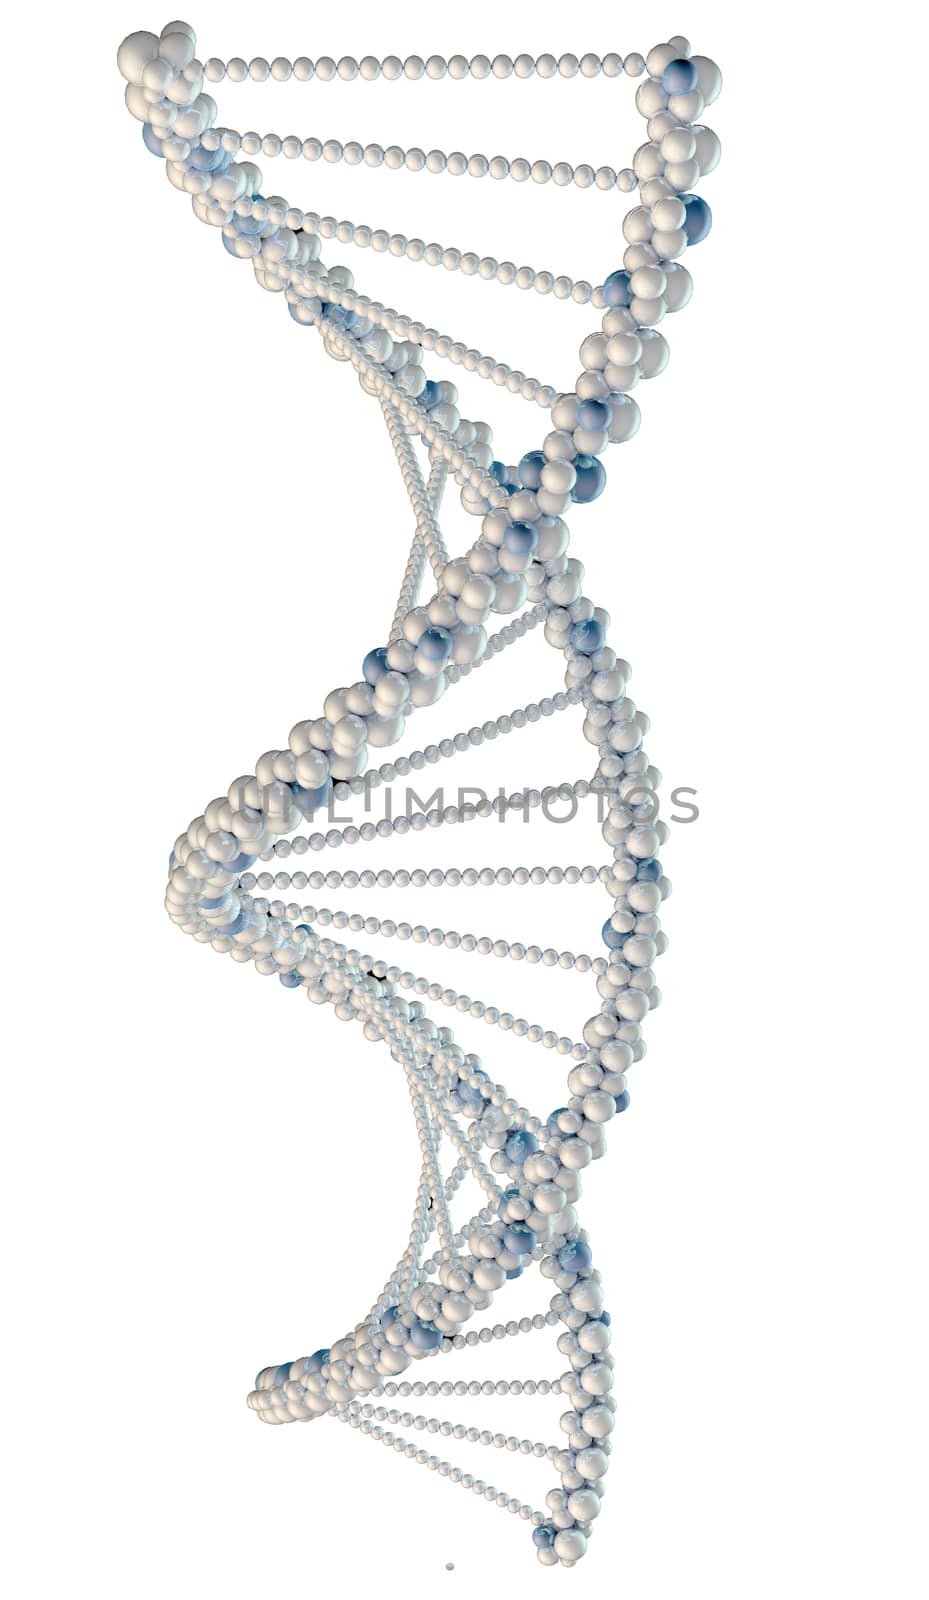 Illustration of white DNA chain. Isolated background